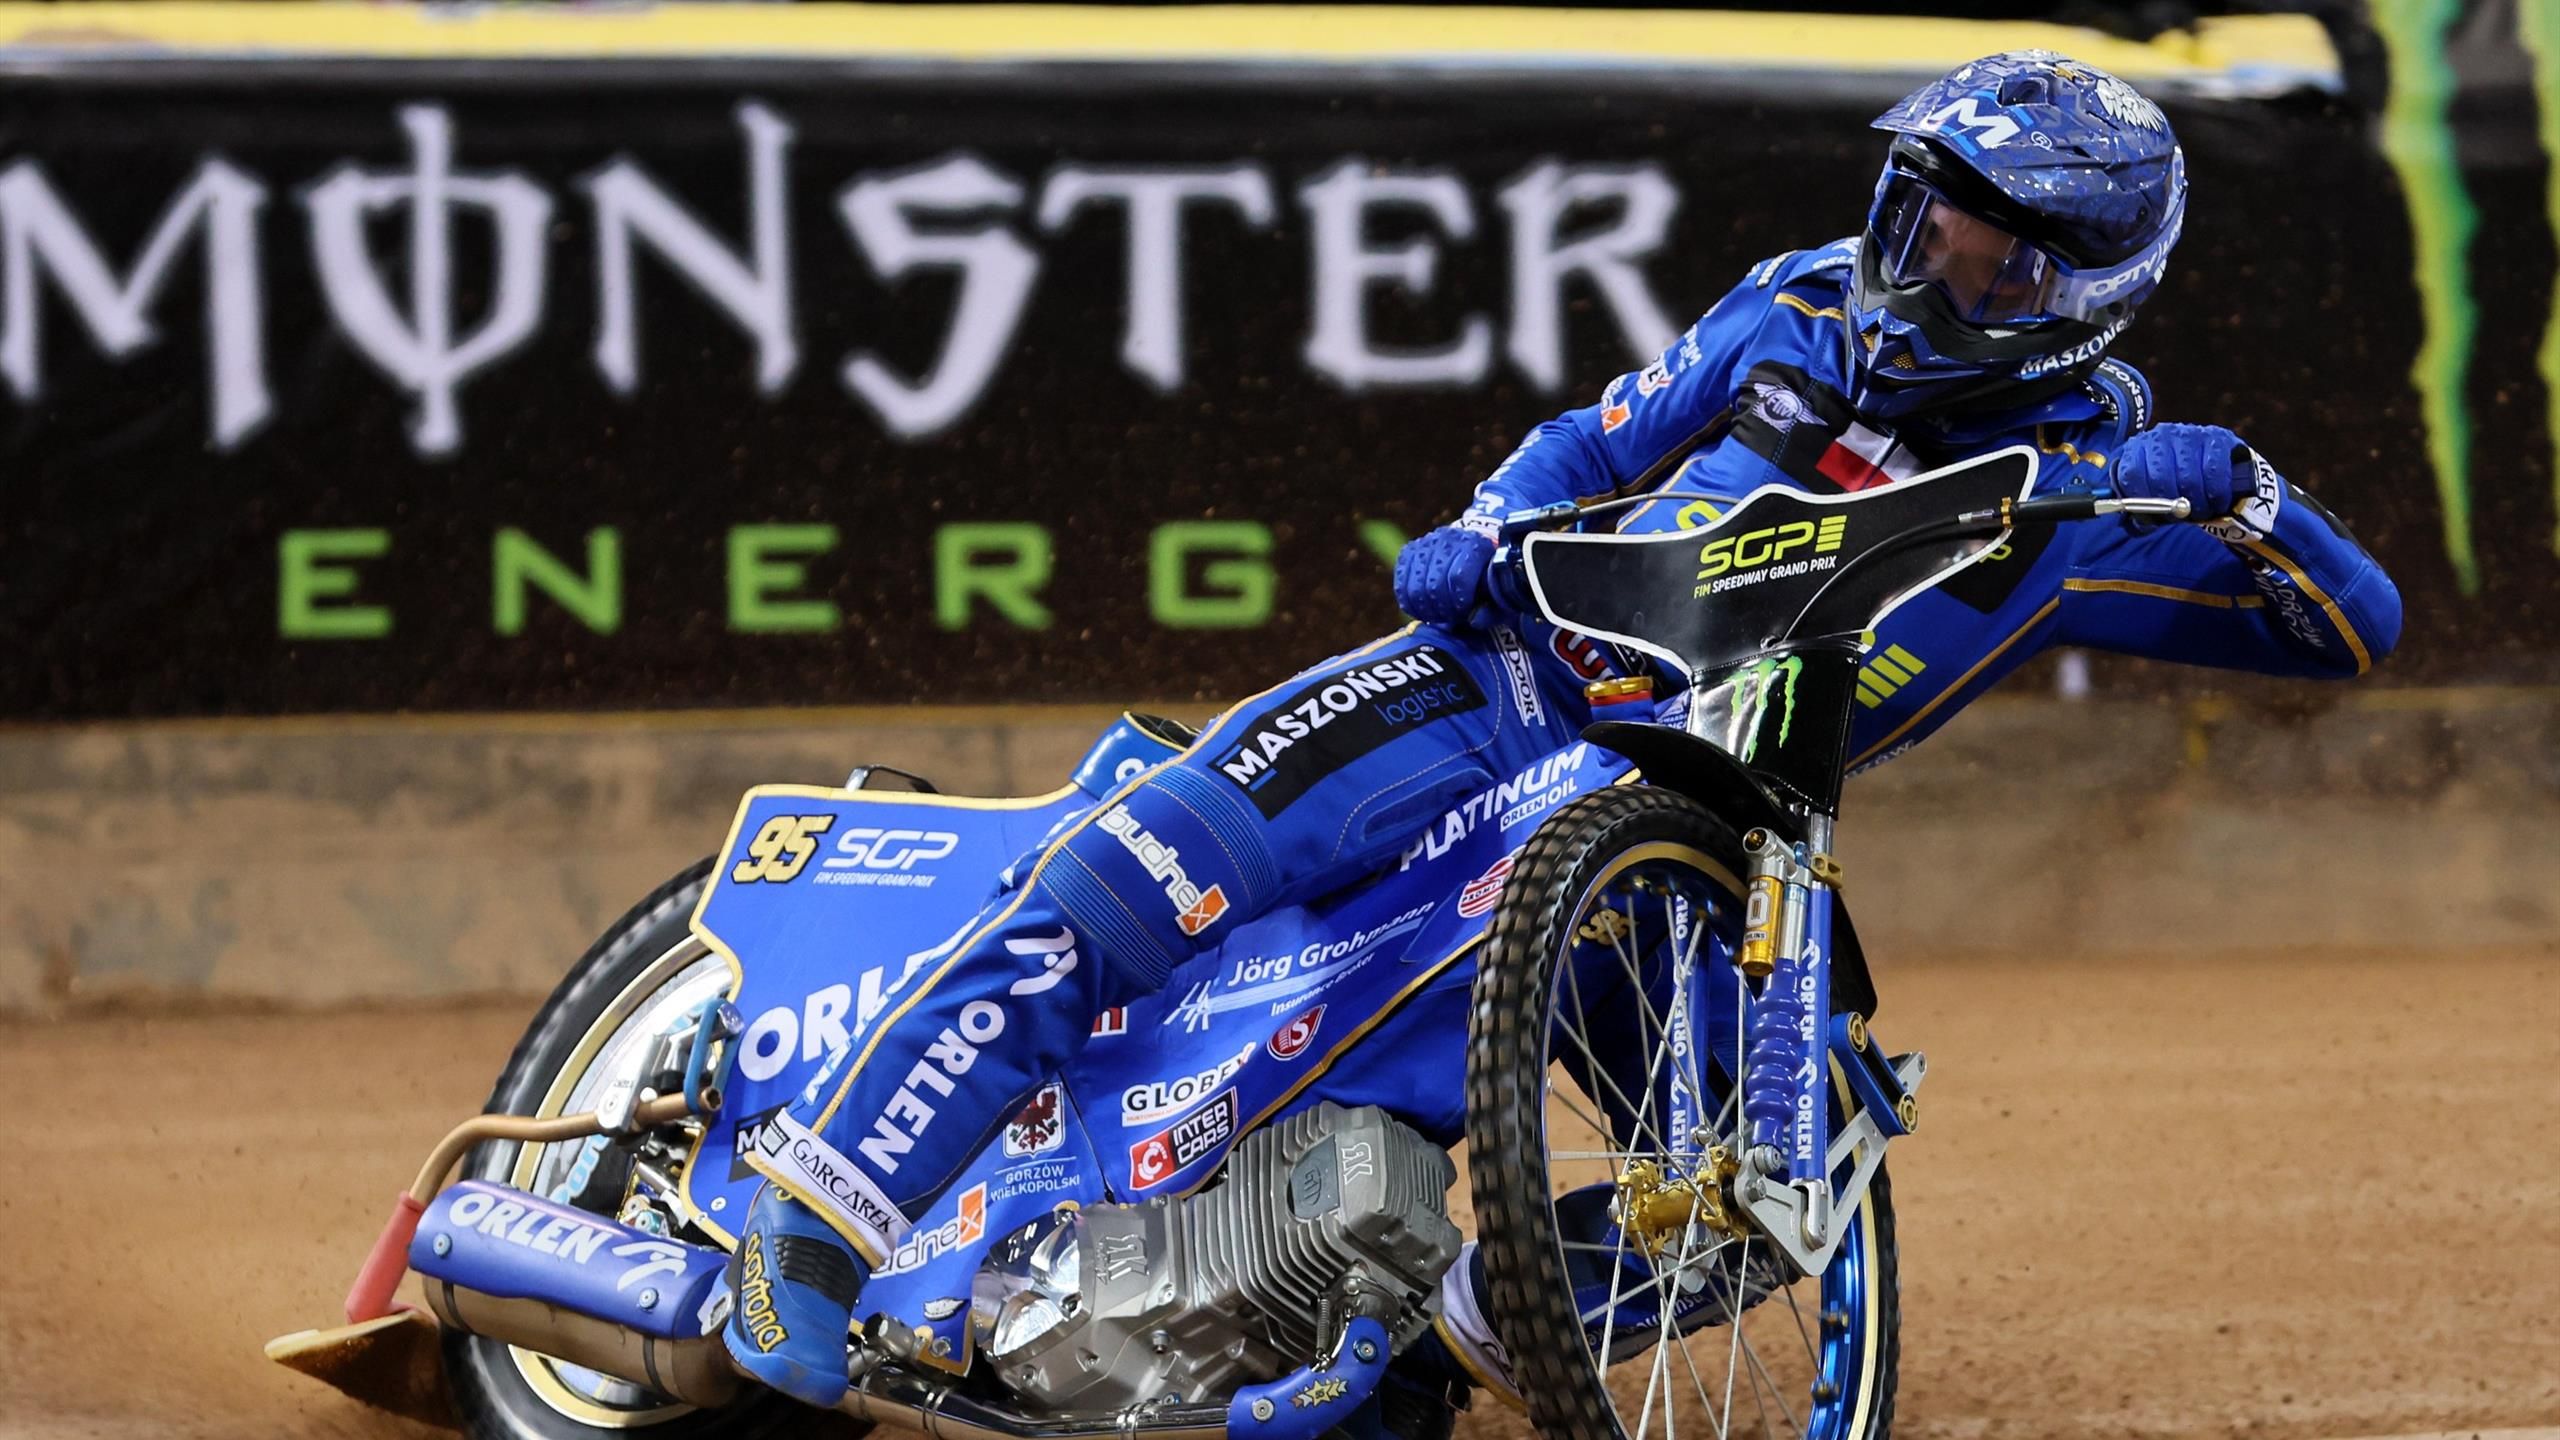 Speedway Grand Prix 2022 Wroclaw LIVE Rivals set sights on